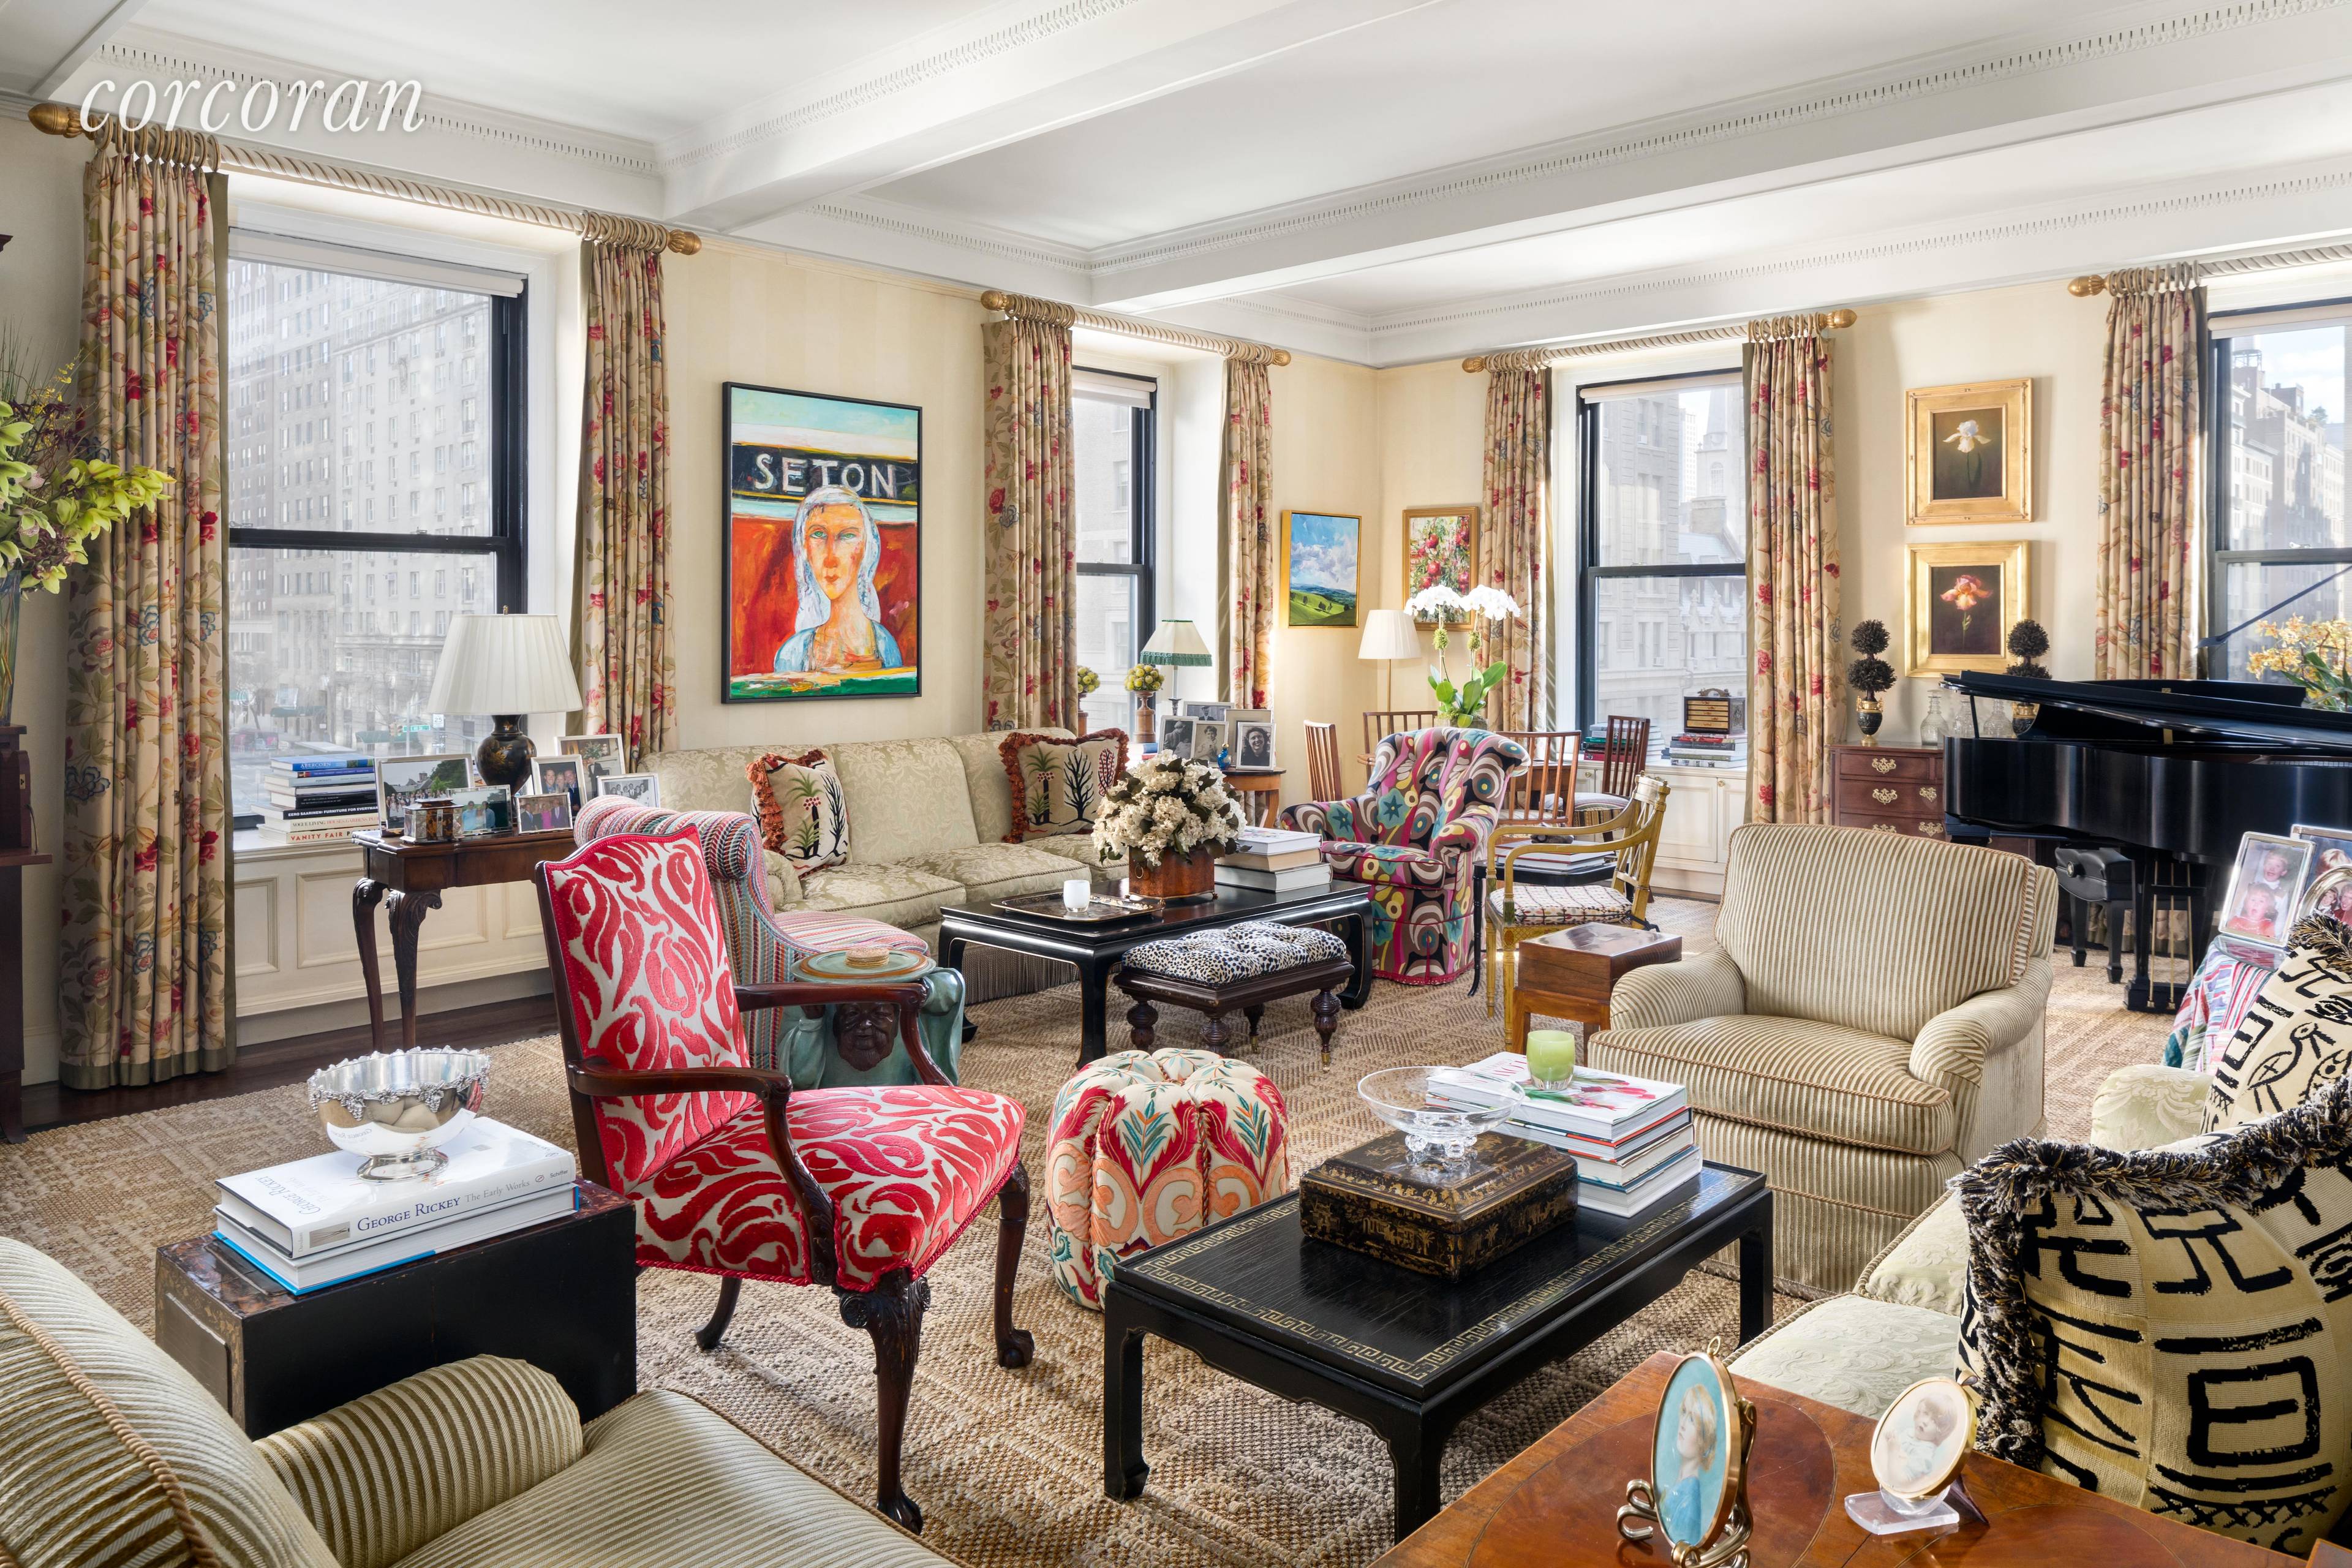 Park Avenue pre war elegance and expanse are defined by this mint four bedroom, four and a half bath duplex.